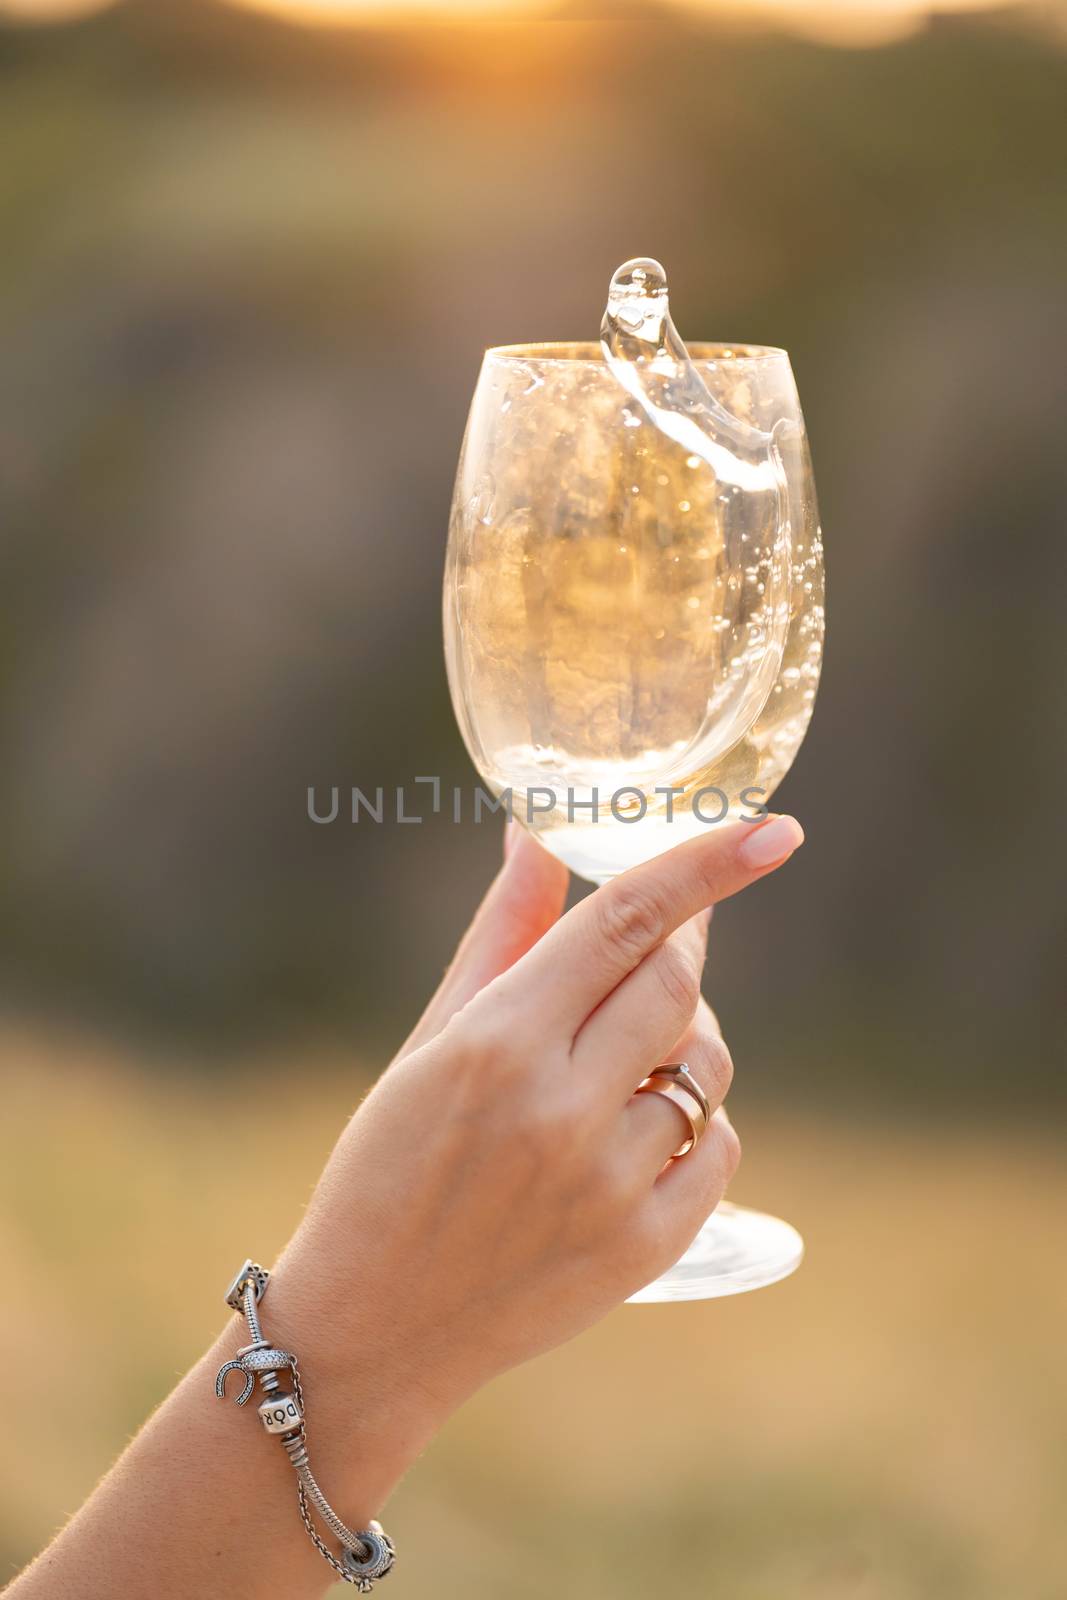 Girl churns wine in a glass at sunset